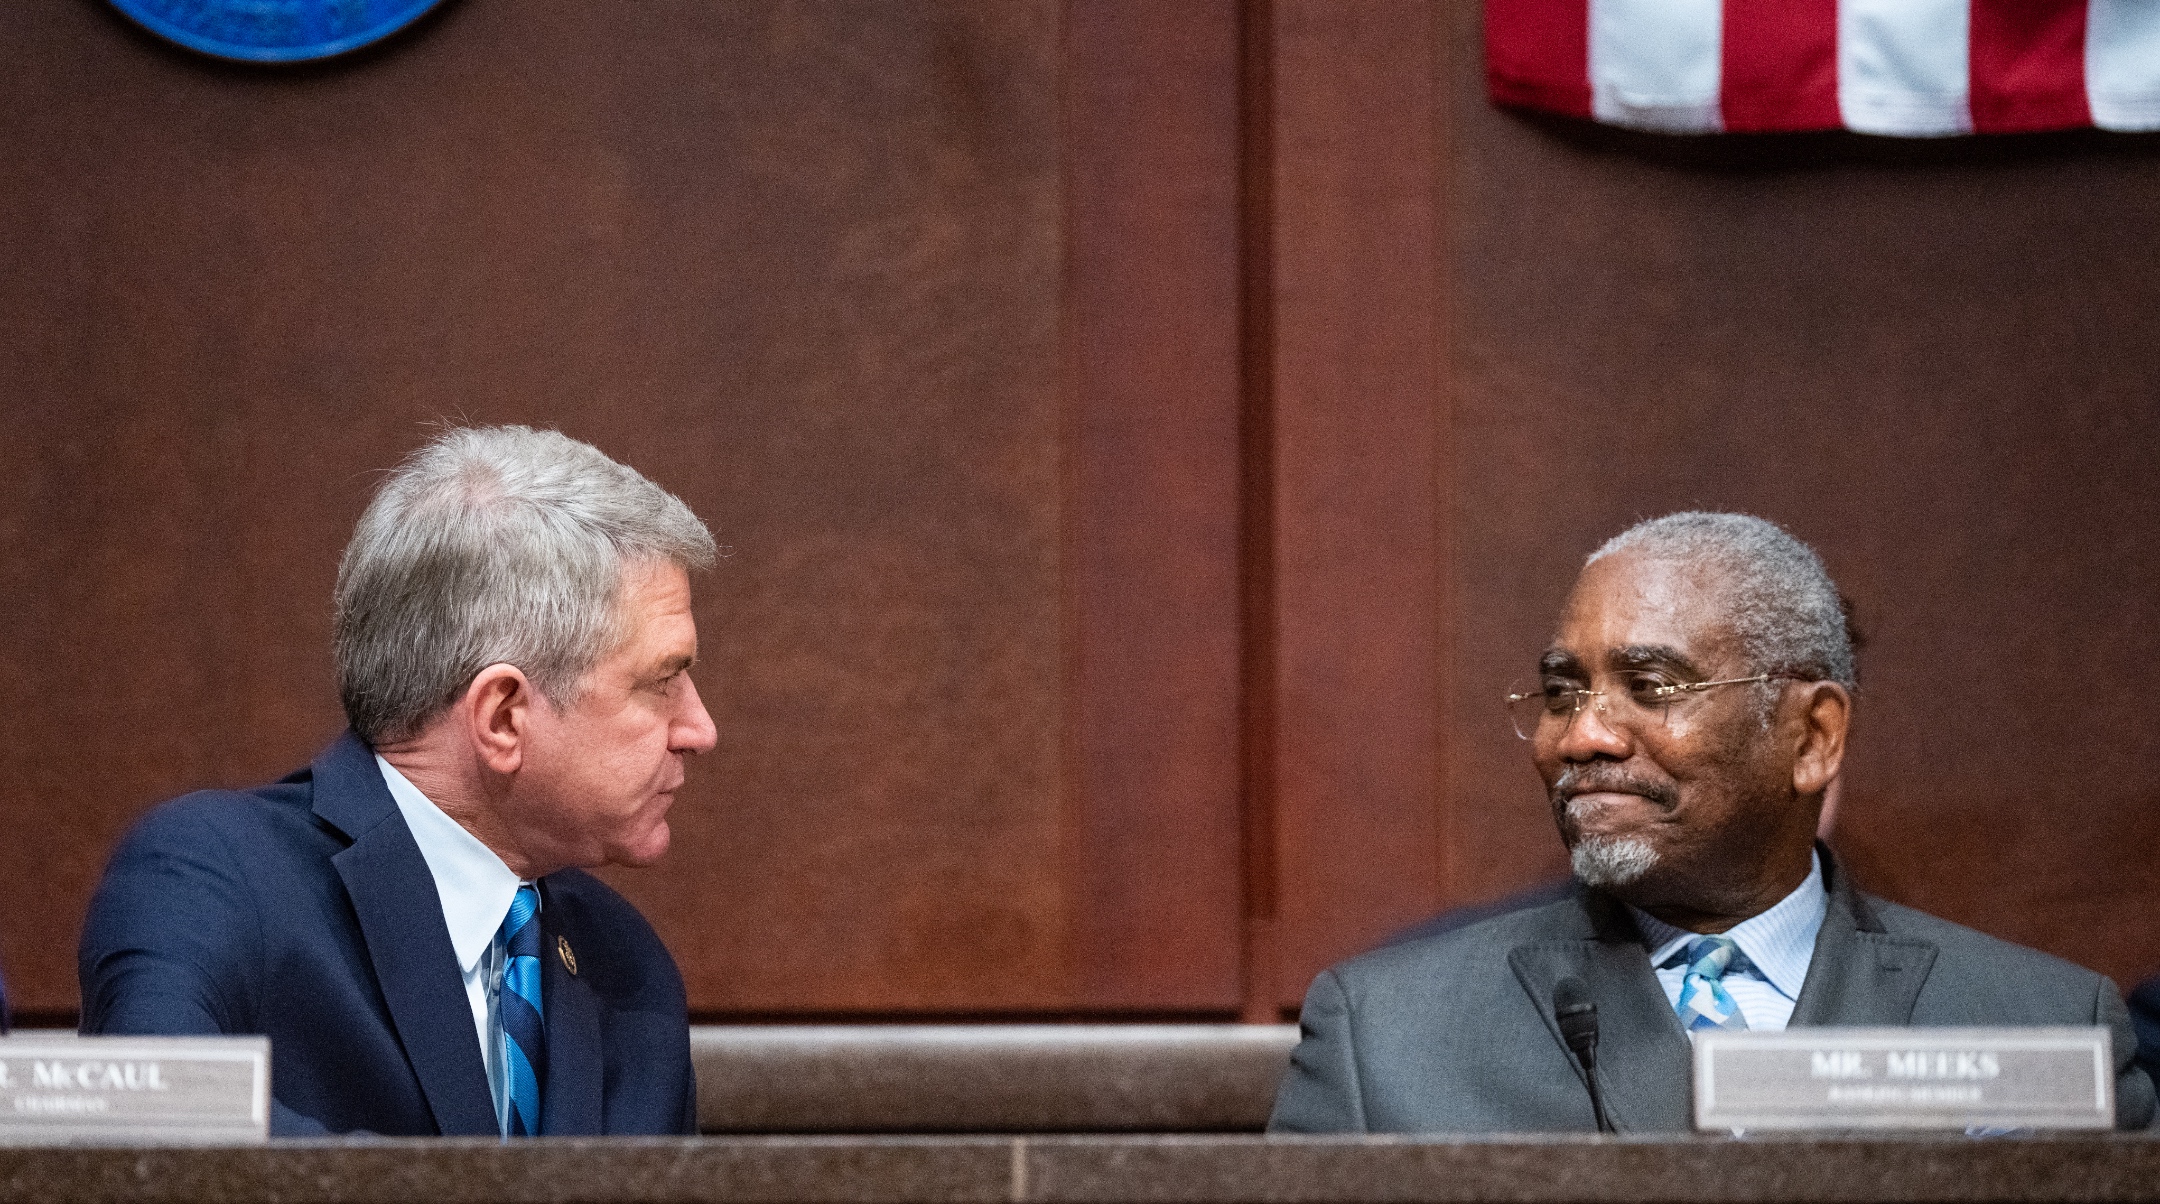 Chairman Michael McCaul, a Texas Republican, left, and ranking member Gregory Meeks, a New York Democrat (right), talk before the House Foreign Affairs Committee markup hearing in the Capitol Visitor Center, March 24, 2023. (Bill Clark/CQ-Roll Call, Inc via Getty Images)